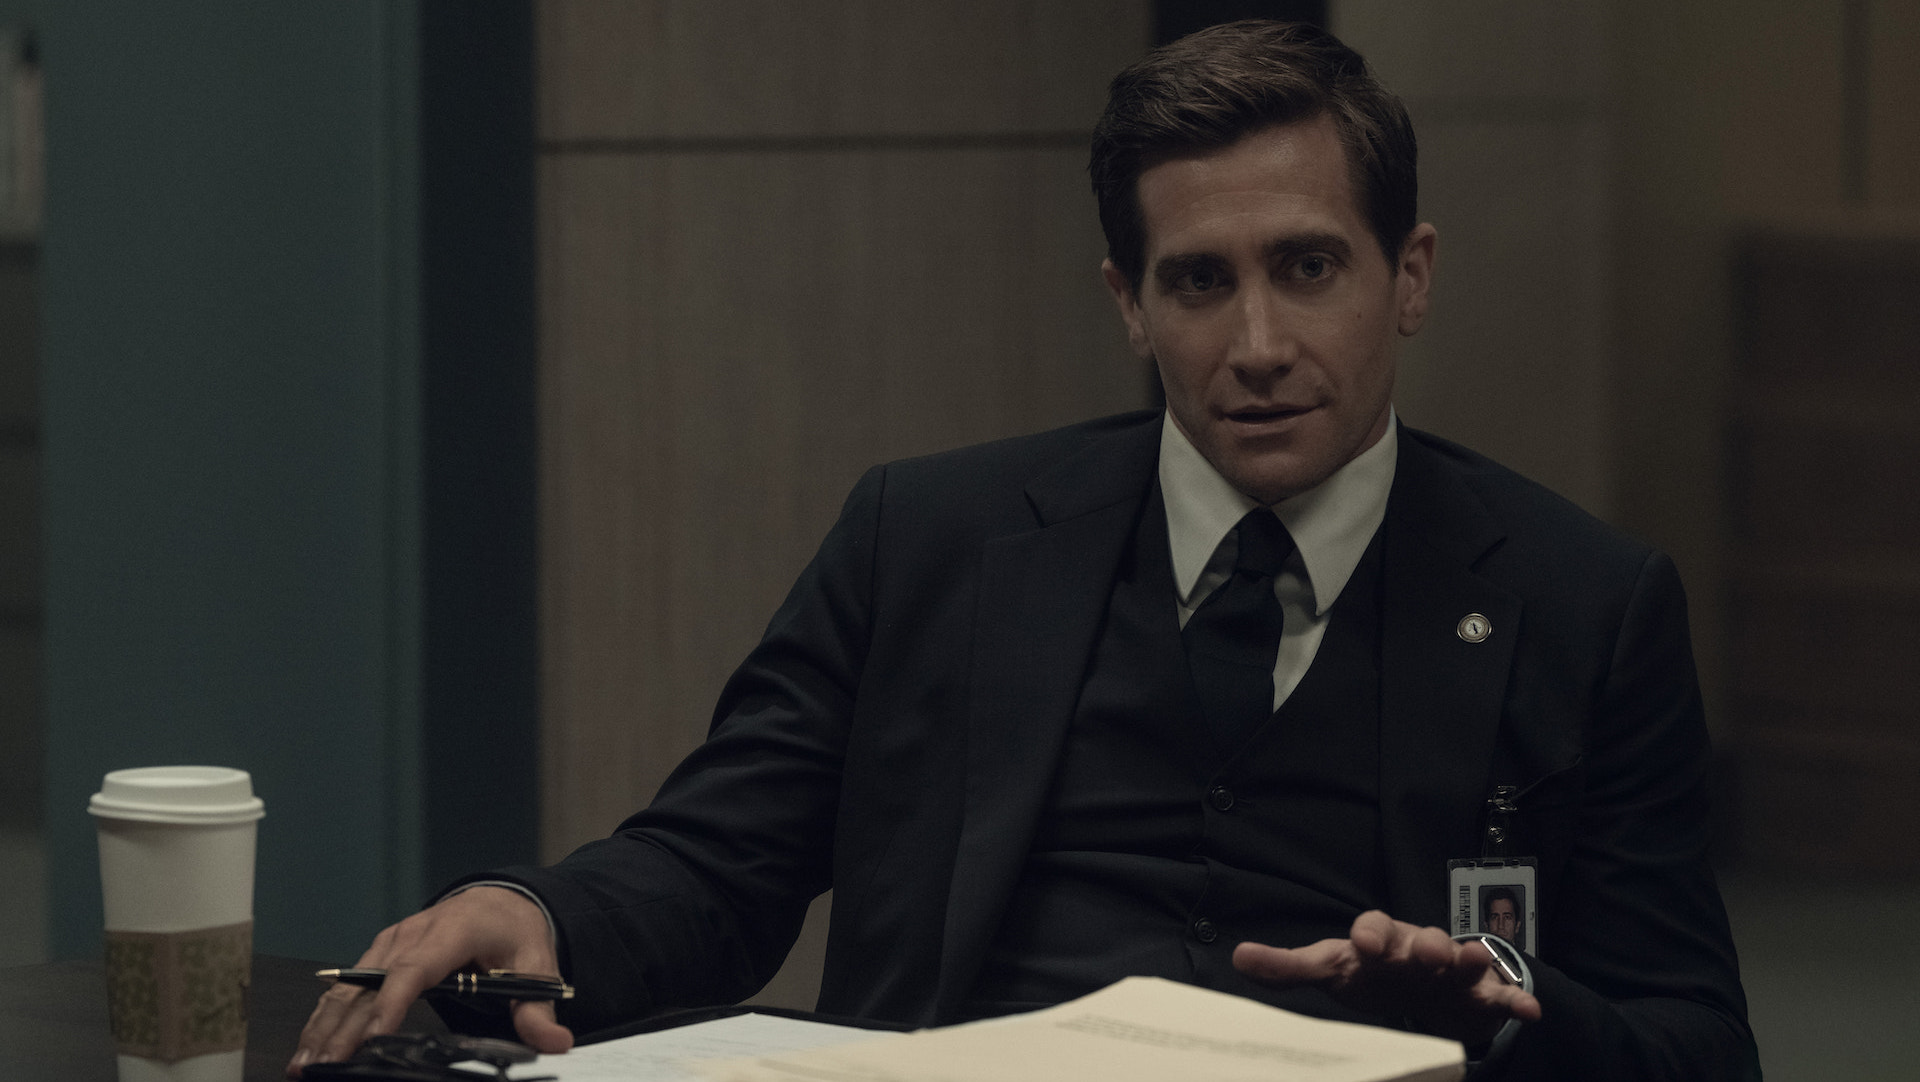 A man wearing a suit and sitting with pen and paper; Jake Gyllenhaal in 'Presumed Innocent'